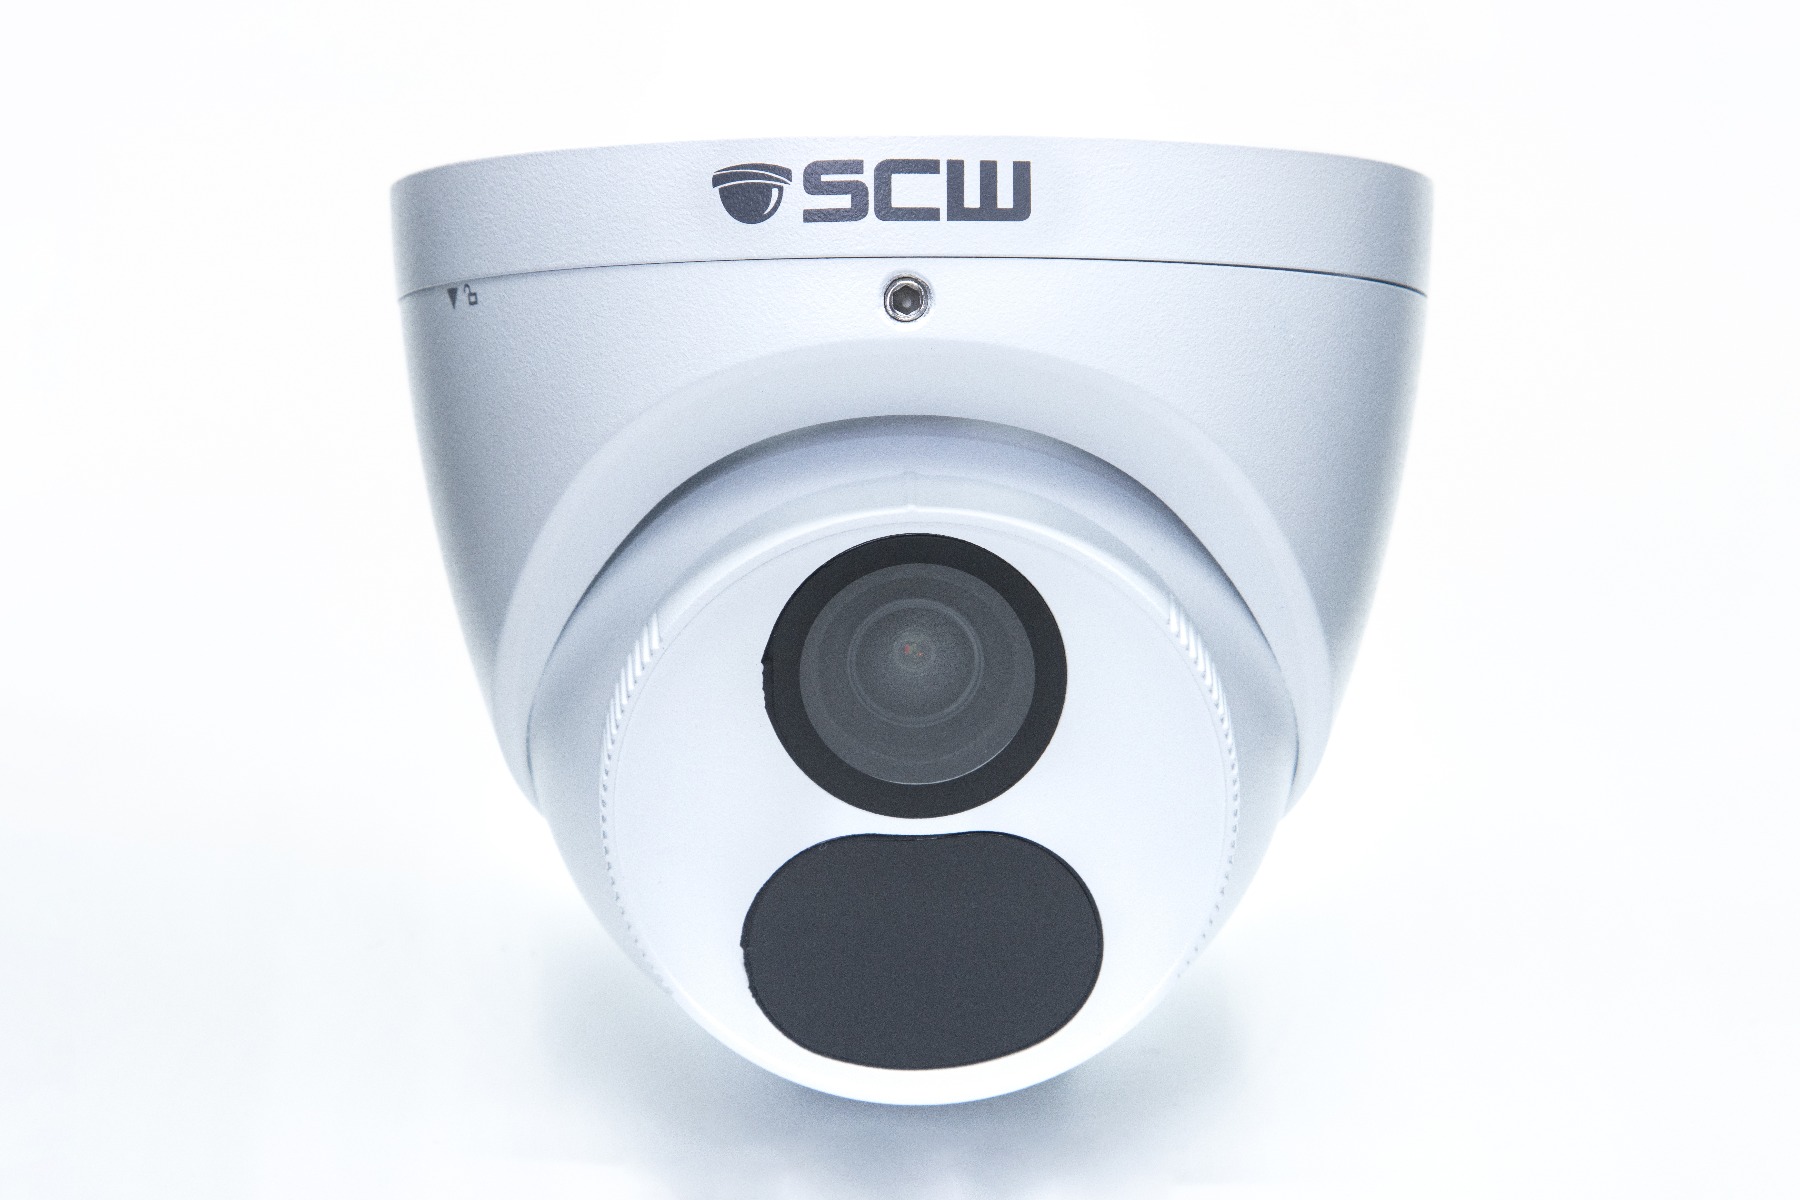 DISCONTINUED - The Deputy 8.0 v2 - 26DF8M - 4K (8MP = 4x1080P) Fixed Wide Angle Lens Turret Dome Camera